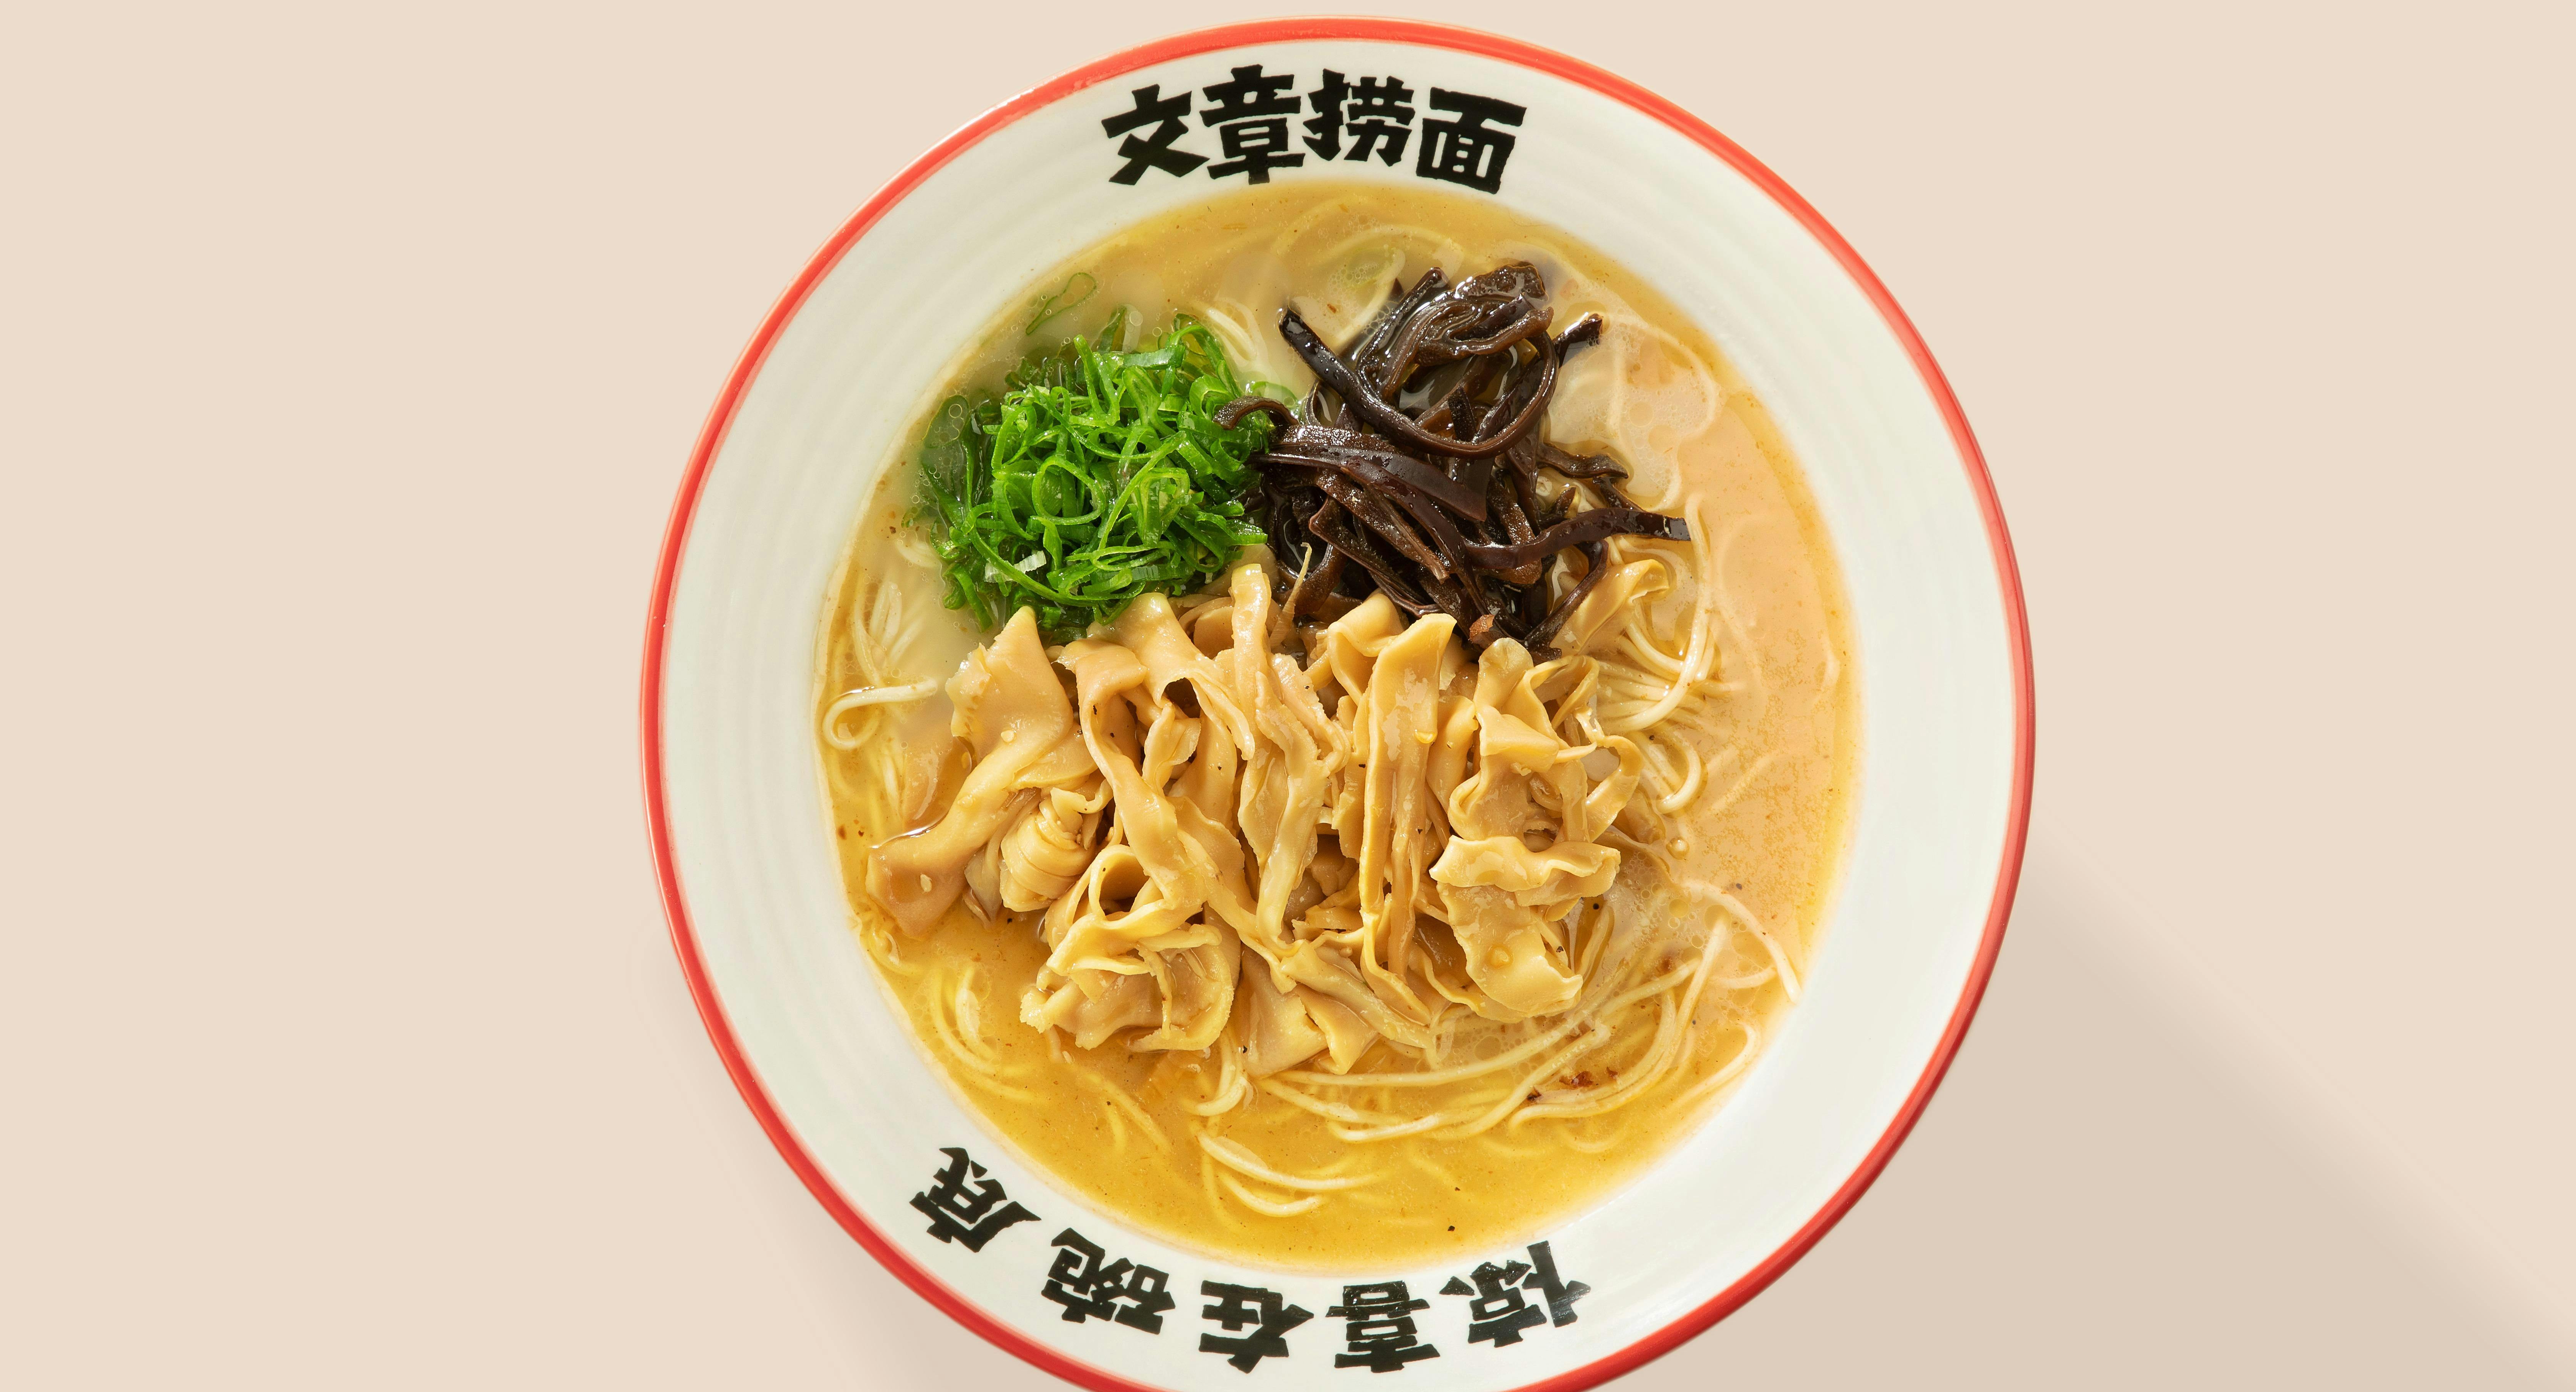 Photo of restaurant Wen Zhang Chinese Noodle 文章捞面 in Bugis, Singapore